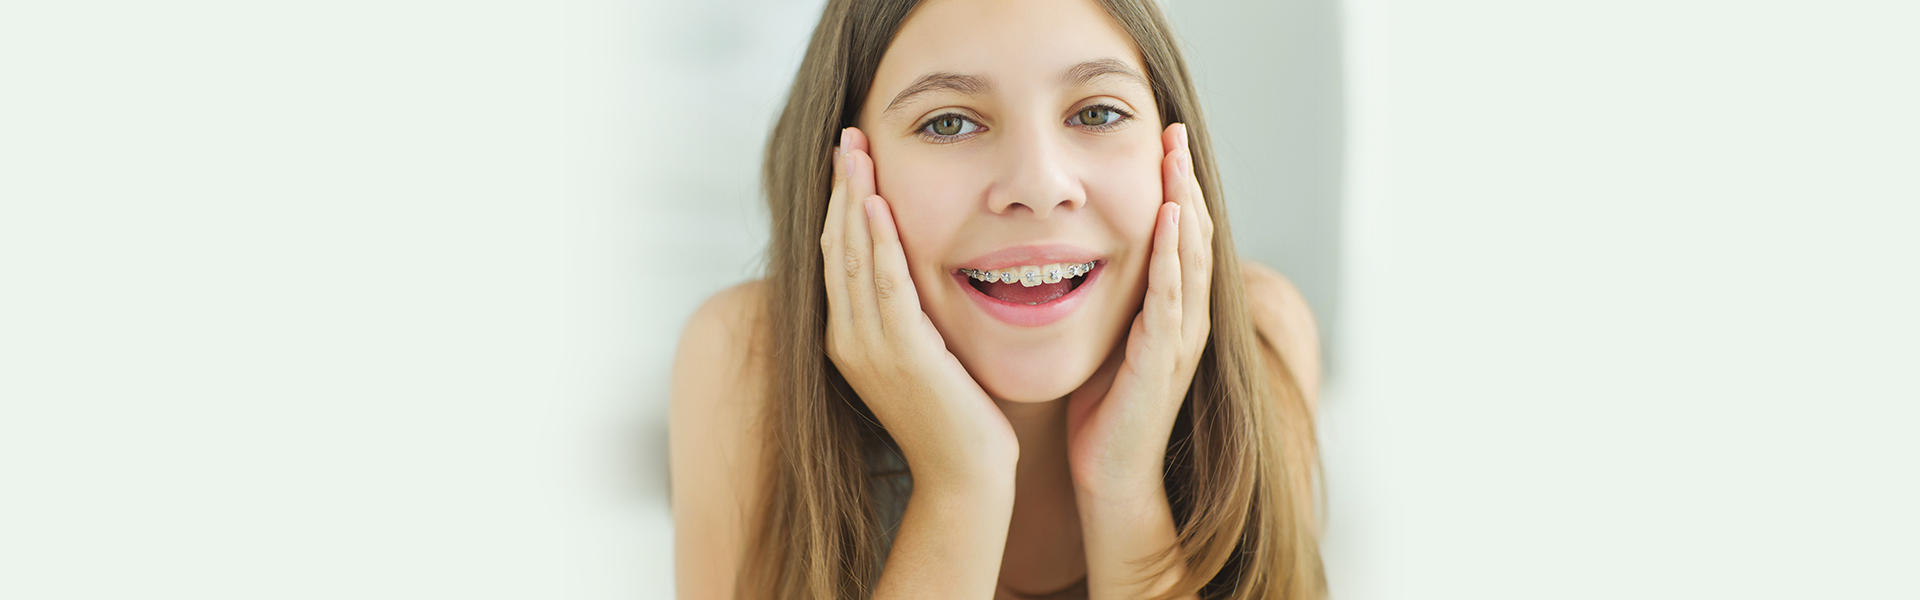 9 Reasons Why You Should Take Your 7-Year-Old to the Orthodontist